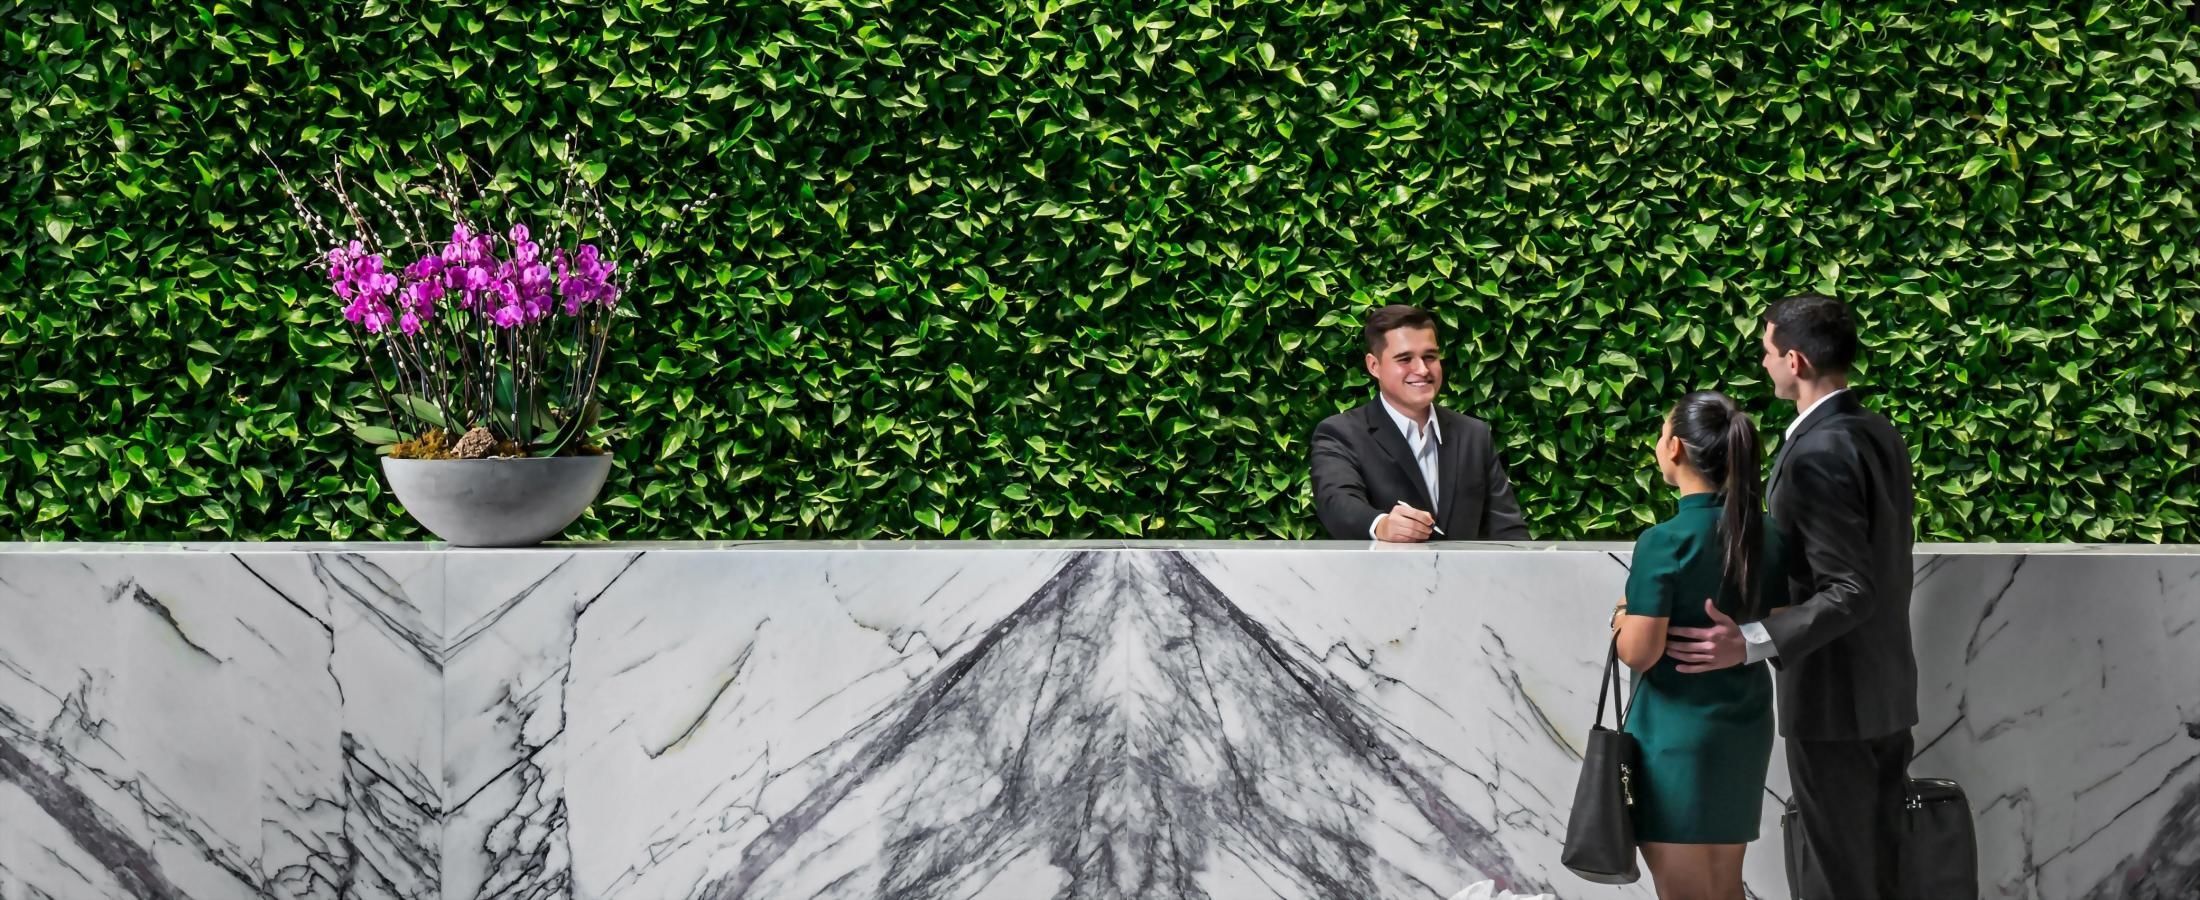 Our living green wall behind the front desk represents our environmentally sustainable practices and eco-friendly initiatives.